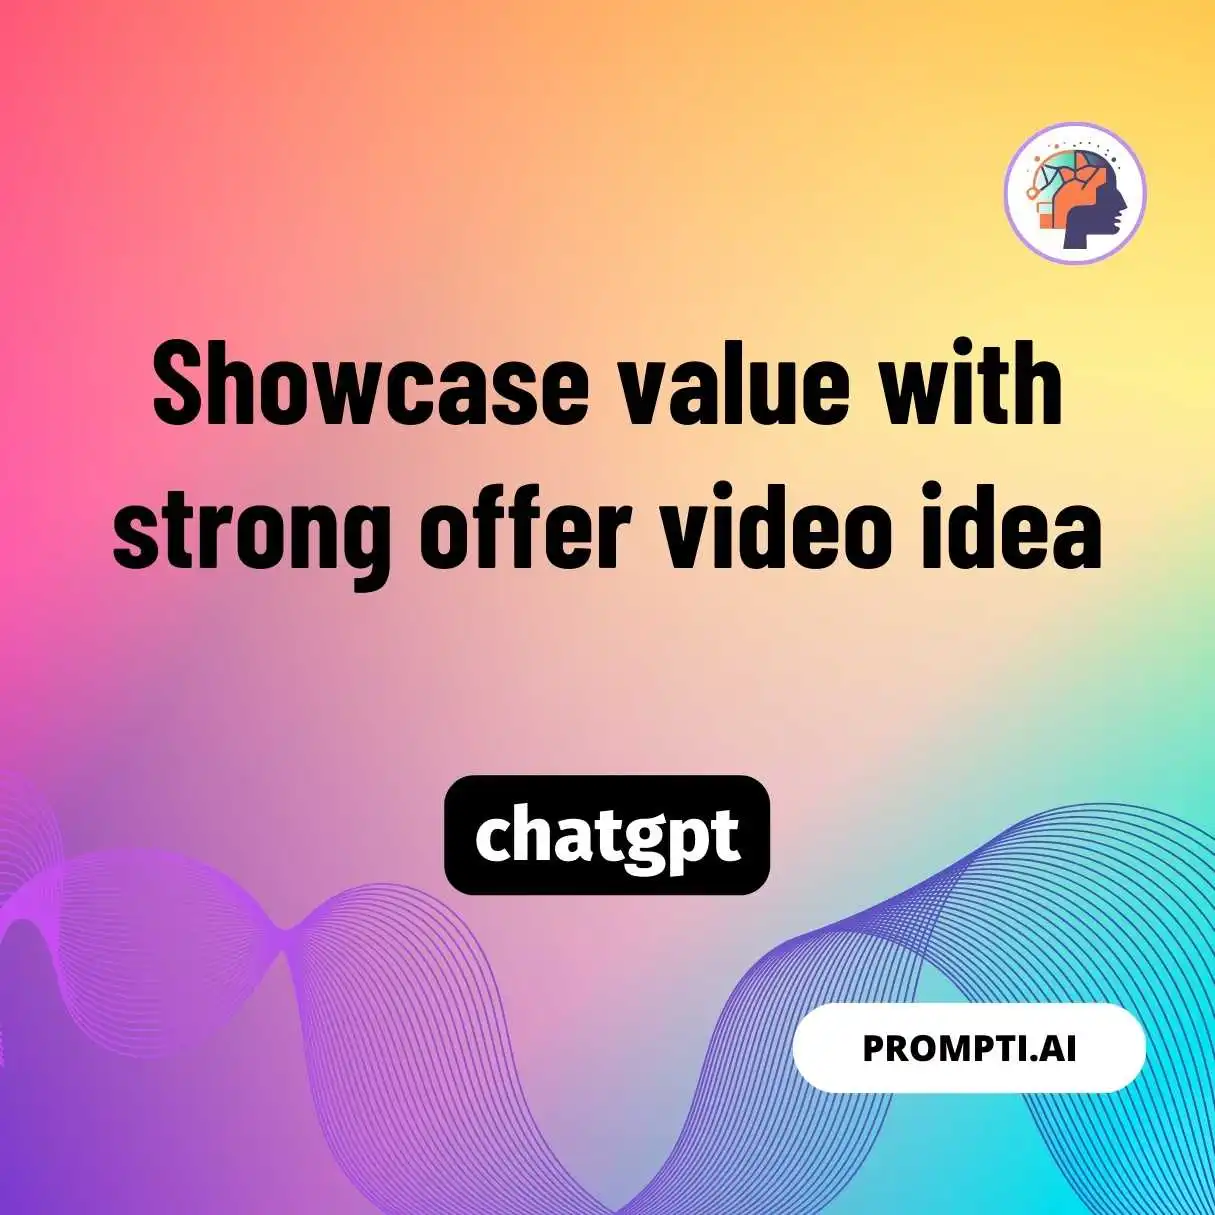 Showcase value with strong offer video idea